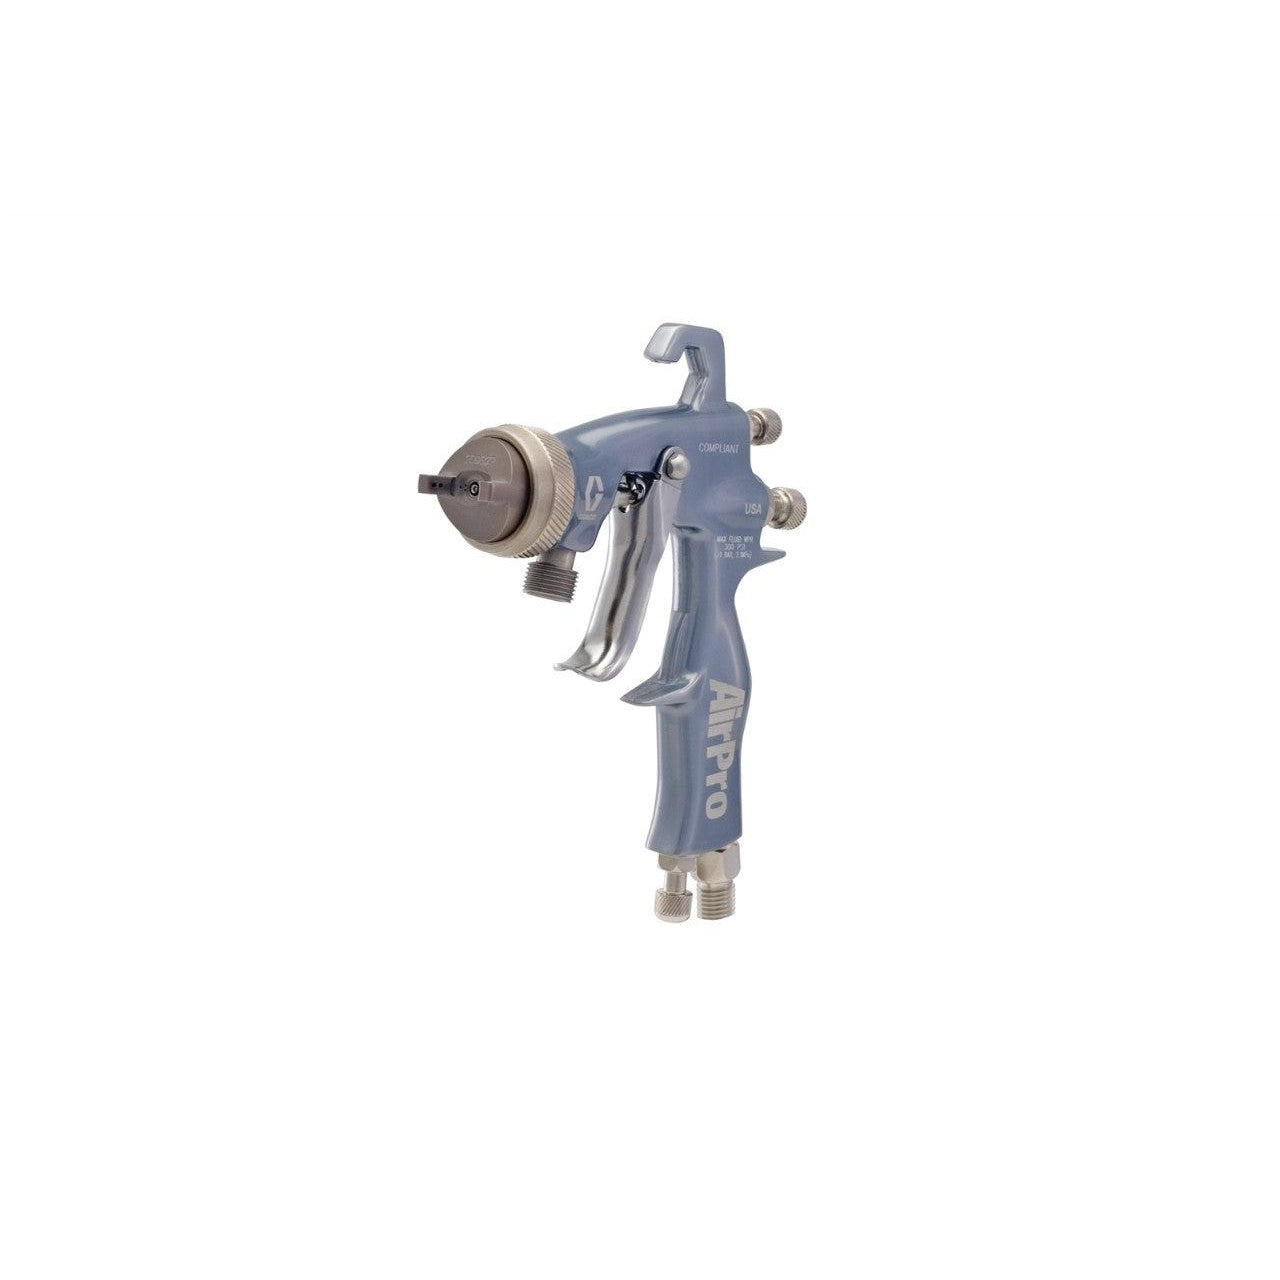 AirPro Air Spray Pressure Feed Gun, Compliant, 0.110 inch (2.8 mm) Nozzle, for High Wear Applications